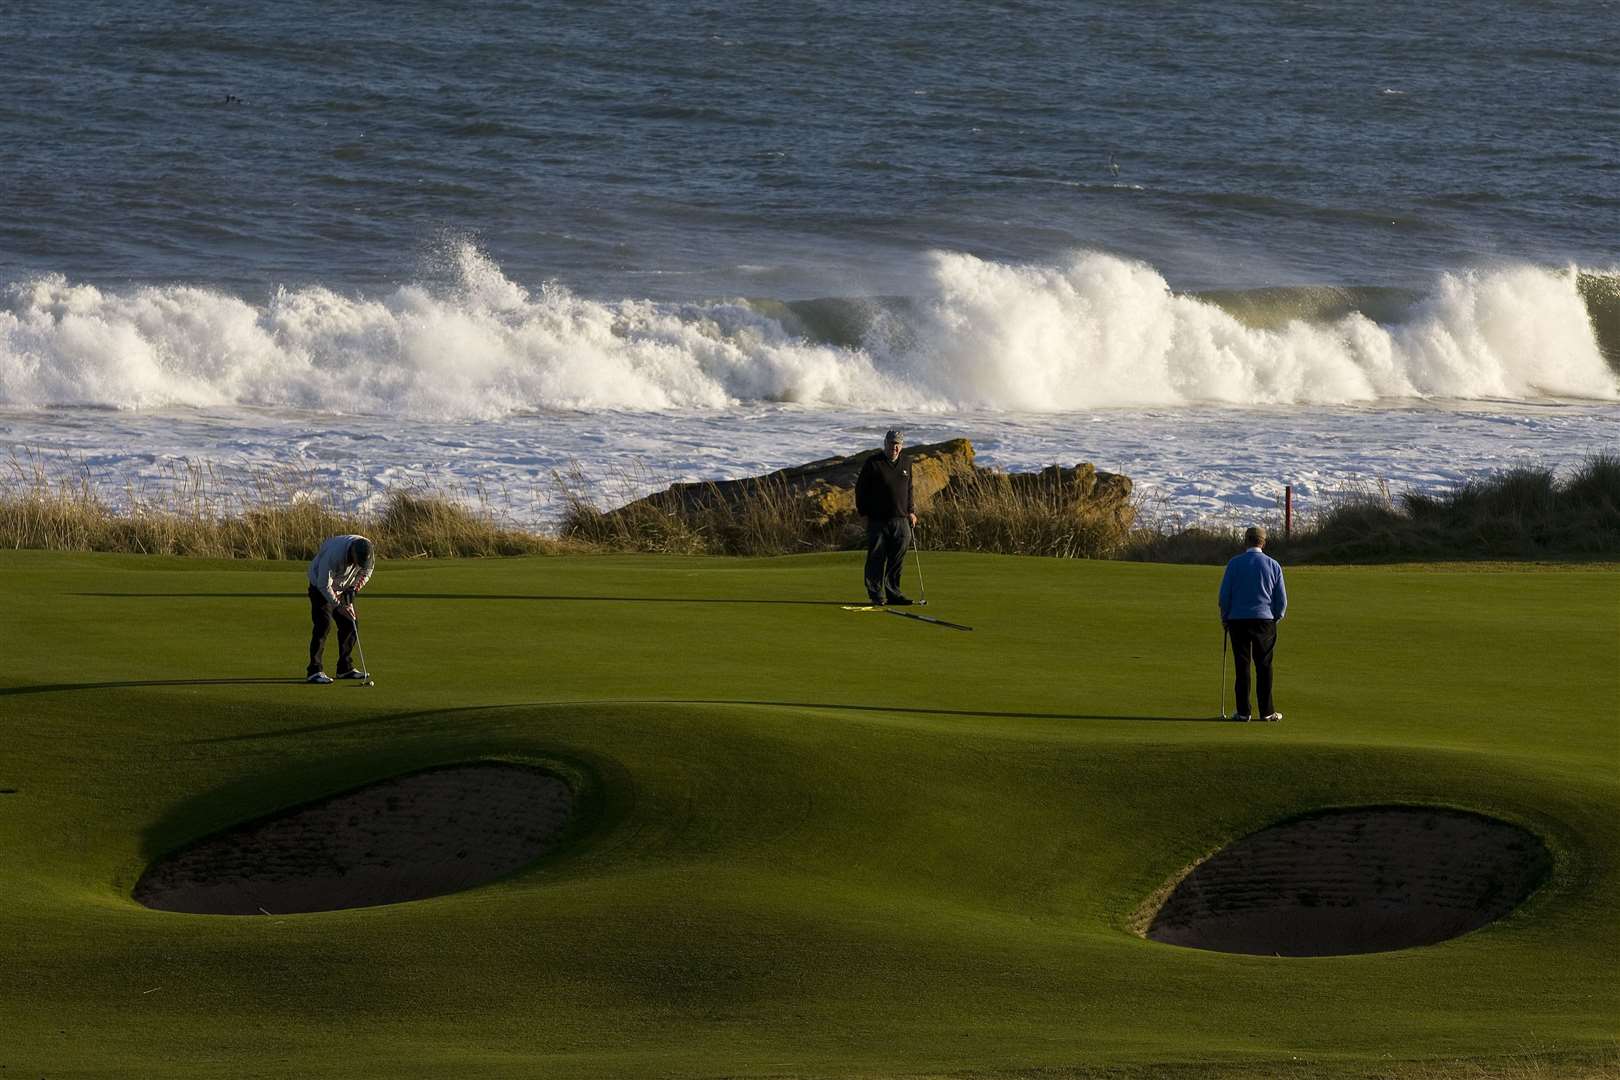 The classic links land 'will offer you nothing but wild magnificent seas, skies, and mountains'.